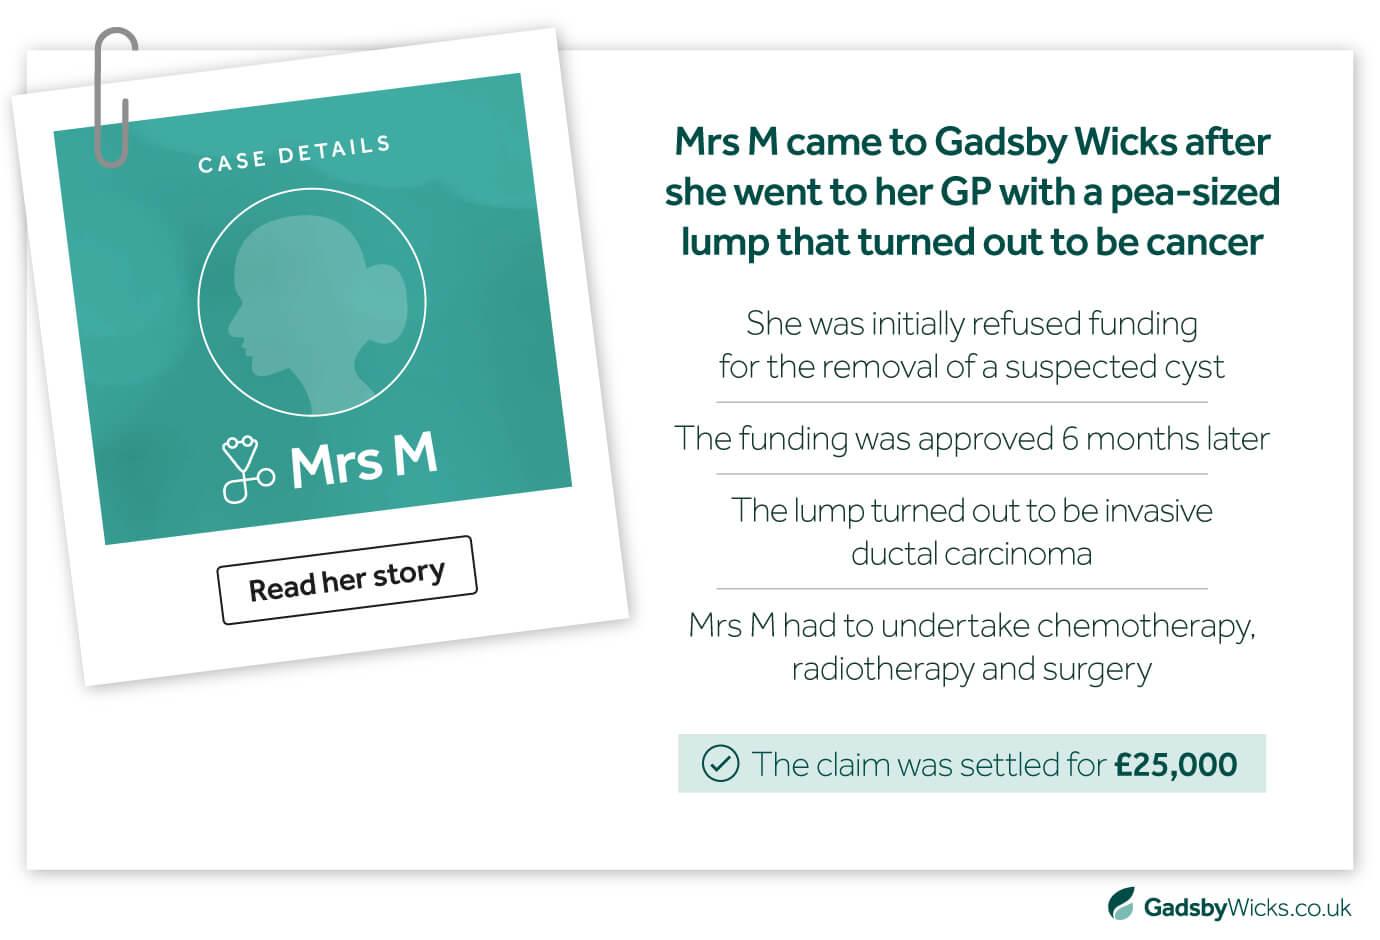 Case study for cancer misdiagnosis claim settled for £25000 compensation by Gadsby Wicks solicitors - Infographic and stats